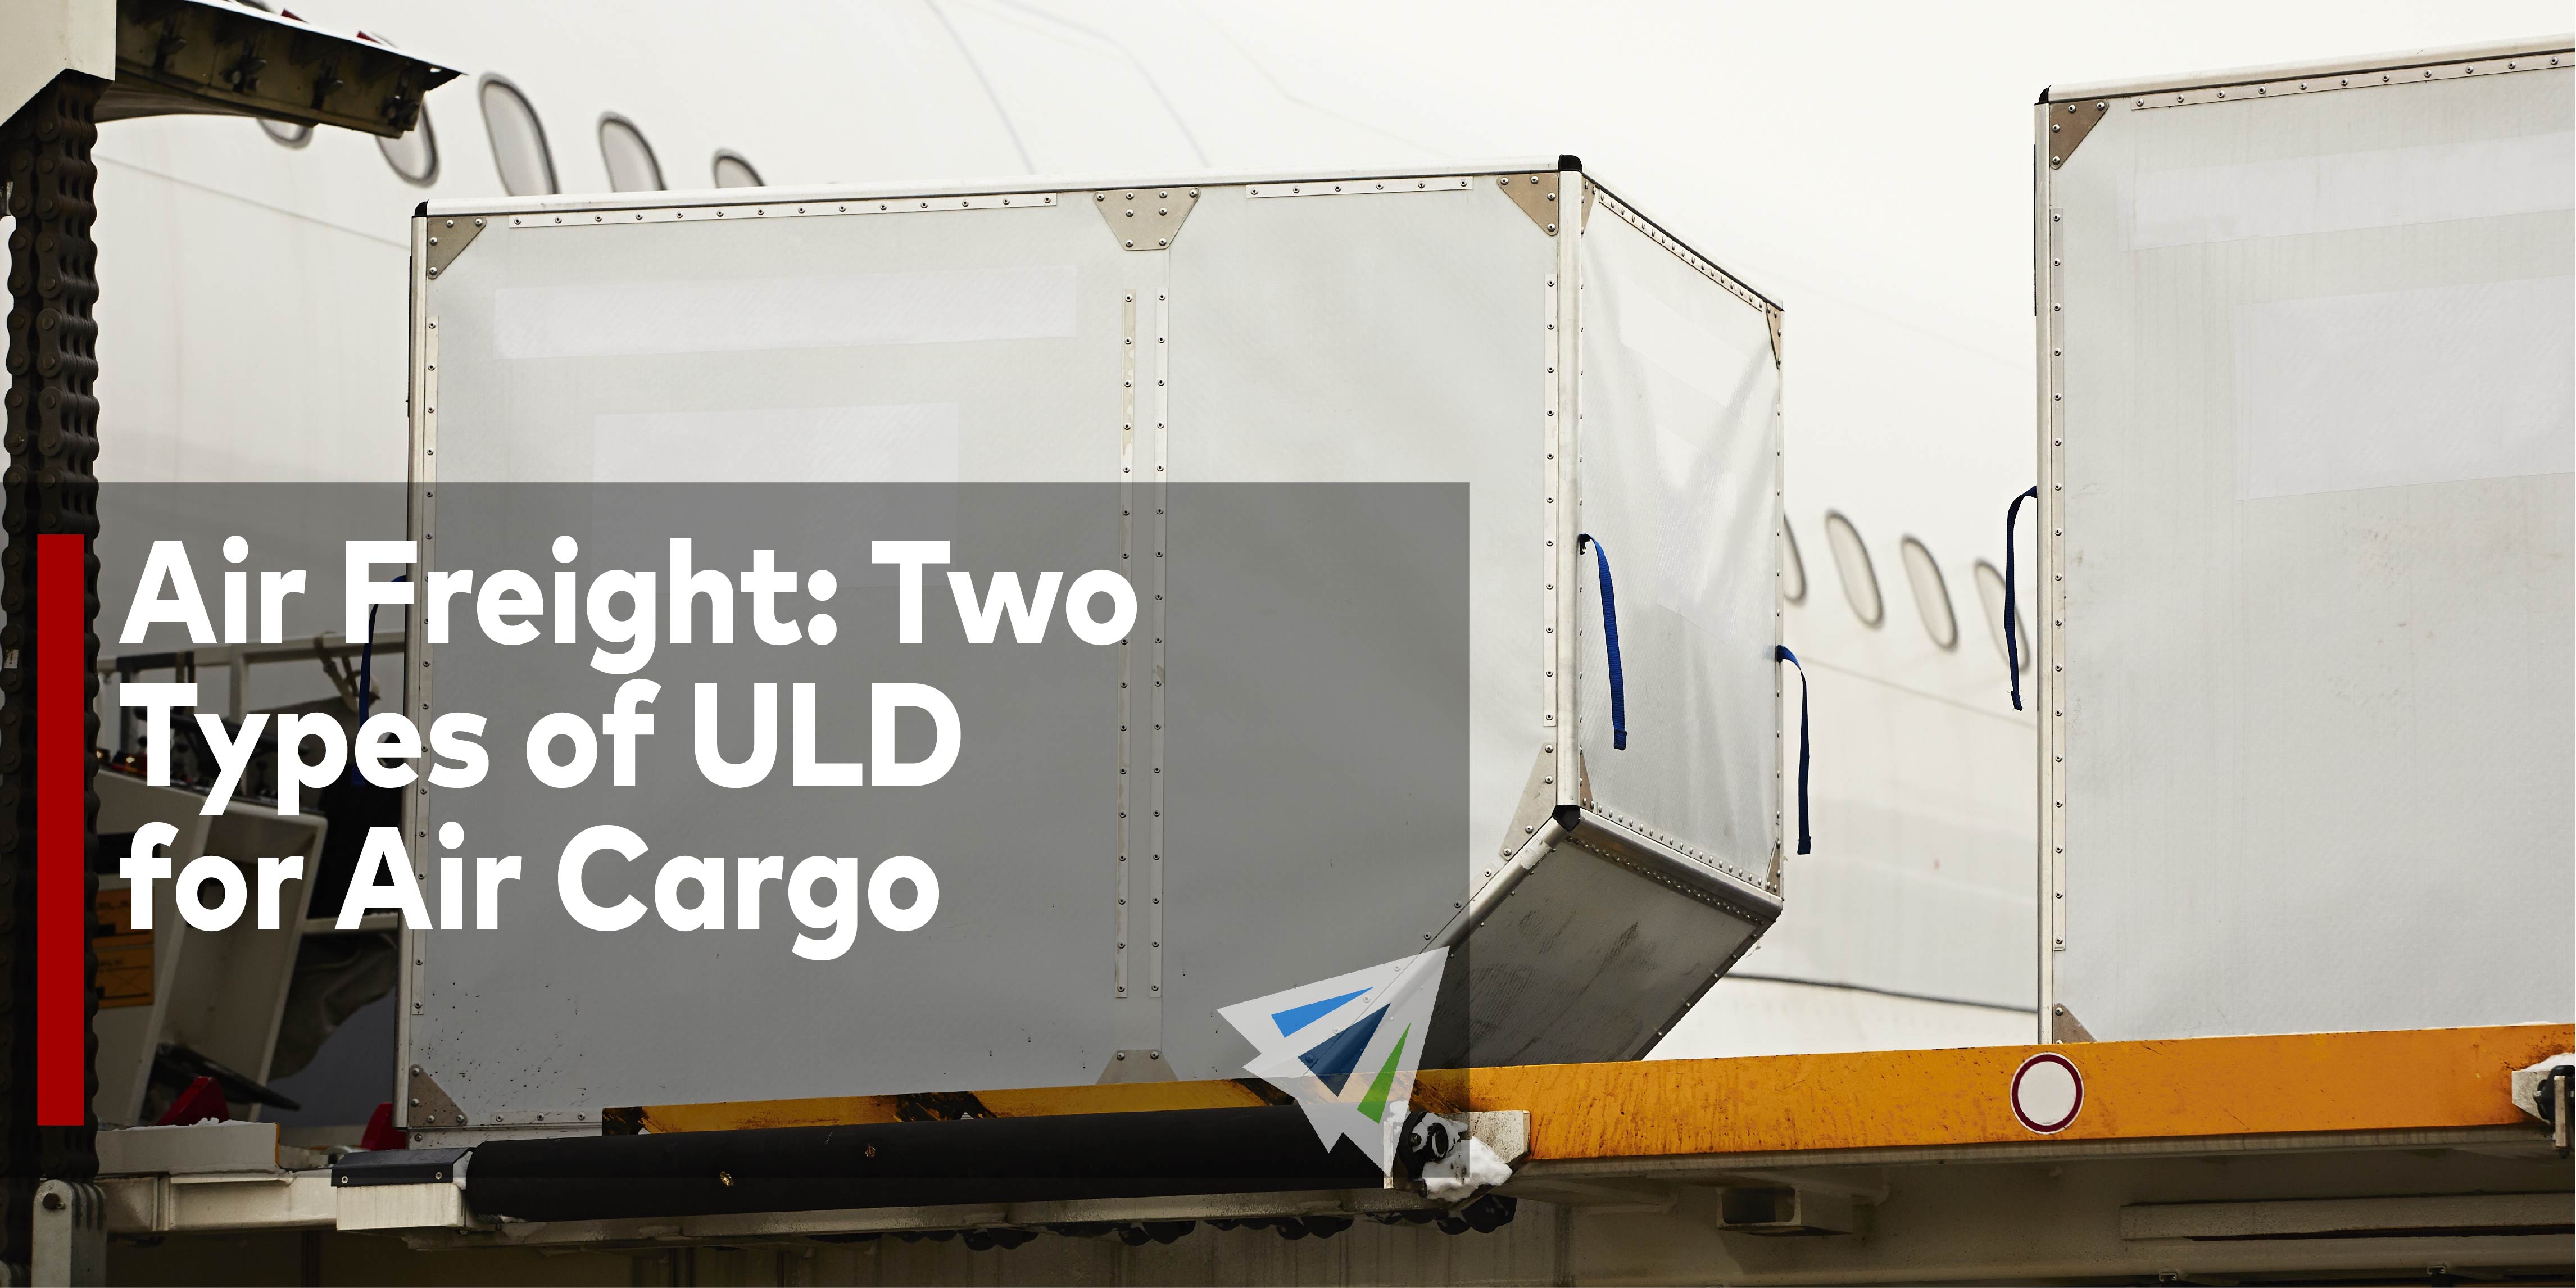 Air Freight: Two Types of ULD for Air Cargo - Land, Sea, & Air